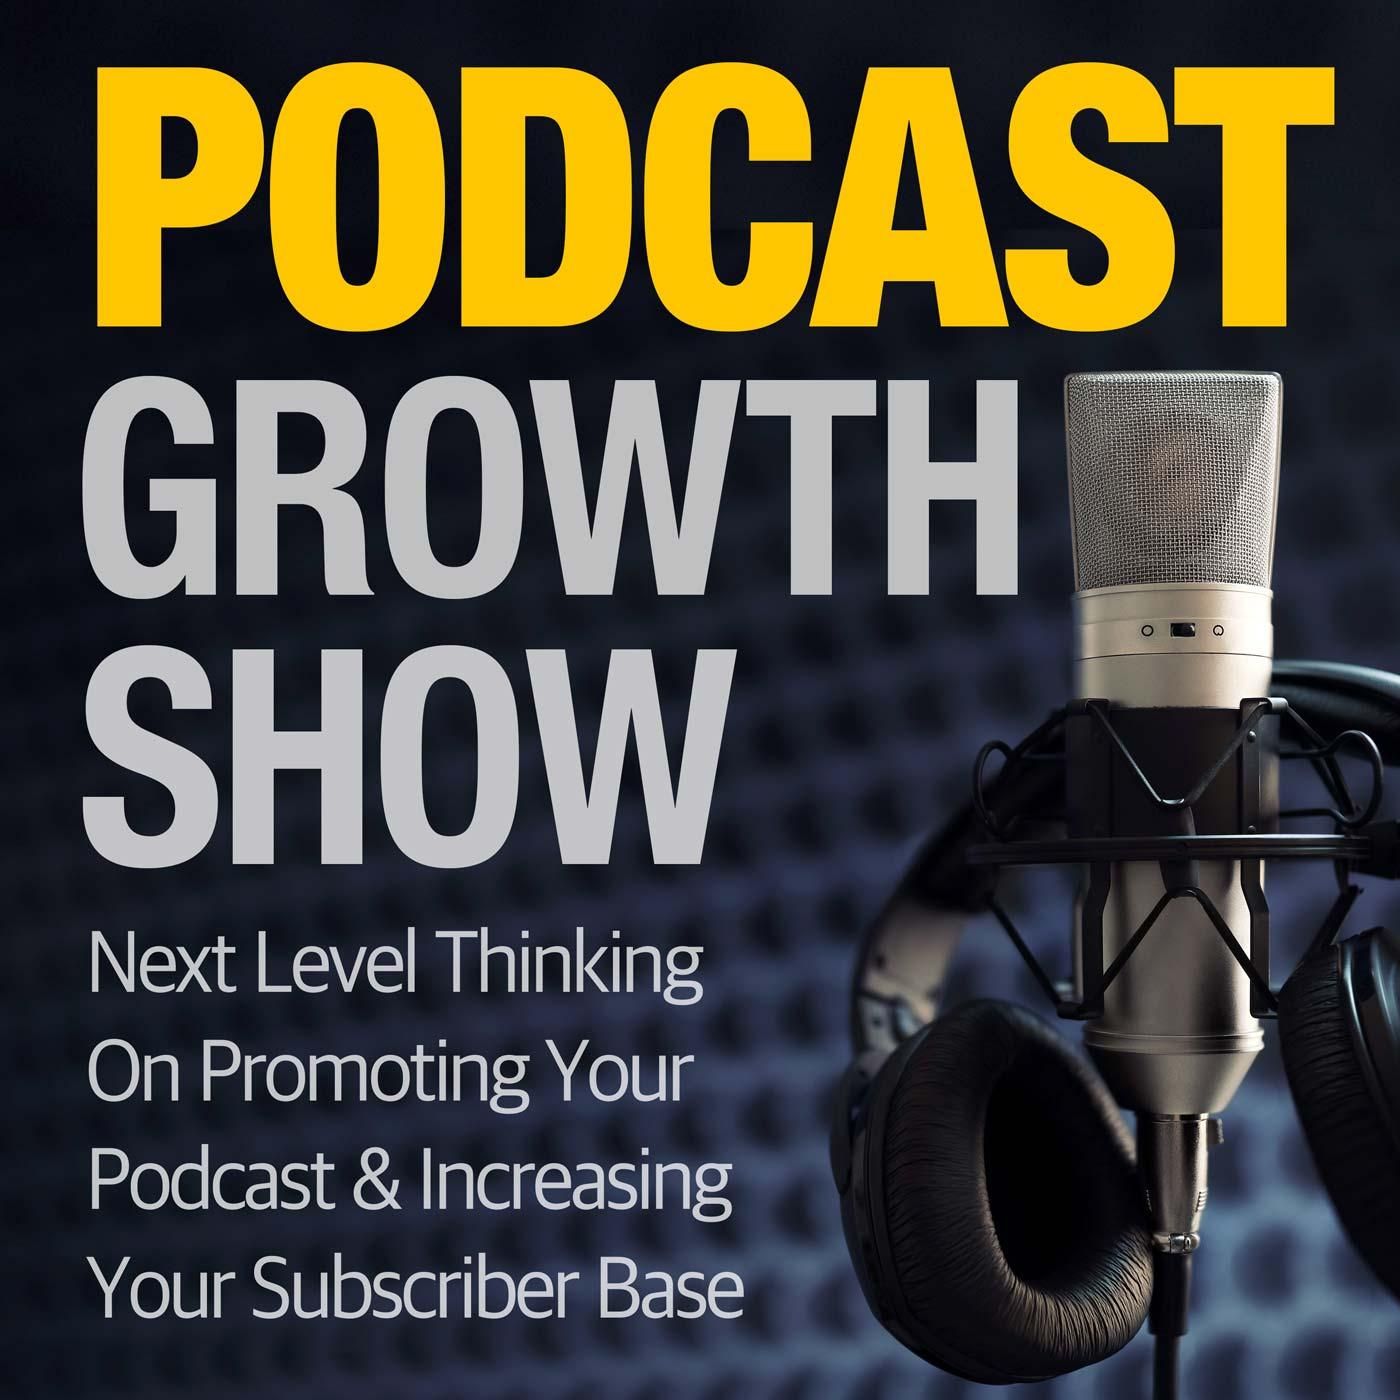 Artwork for podcast The Podcast Growth Show